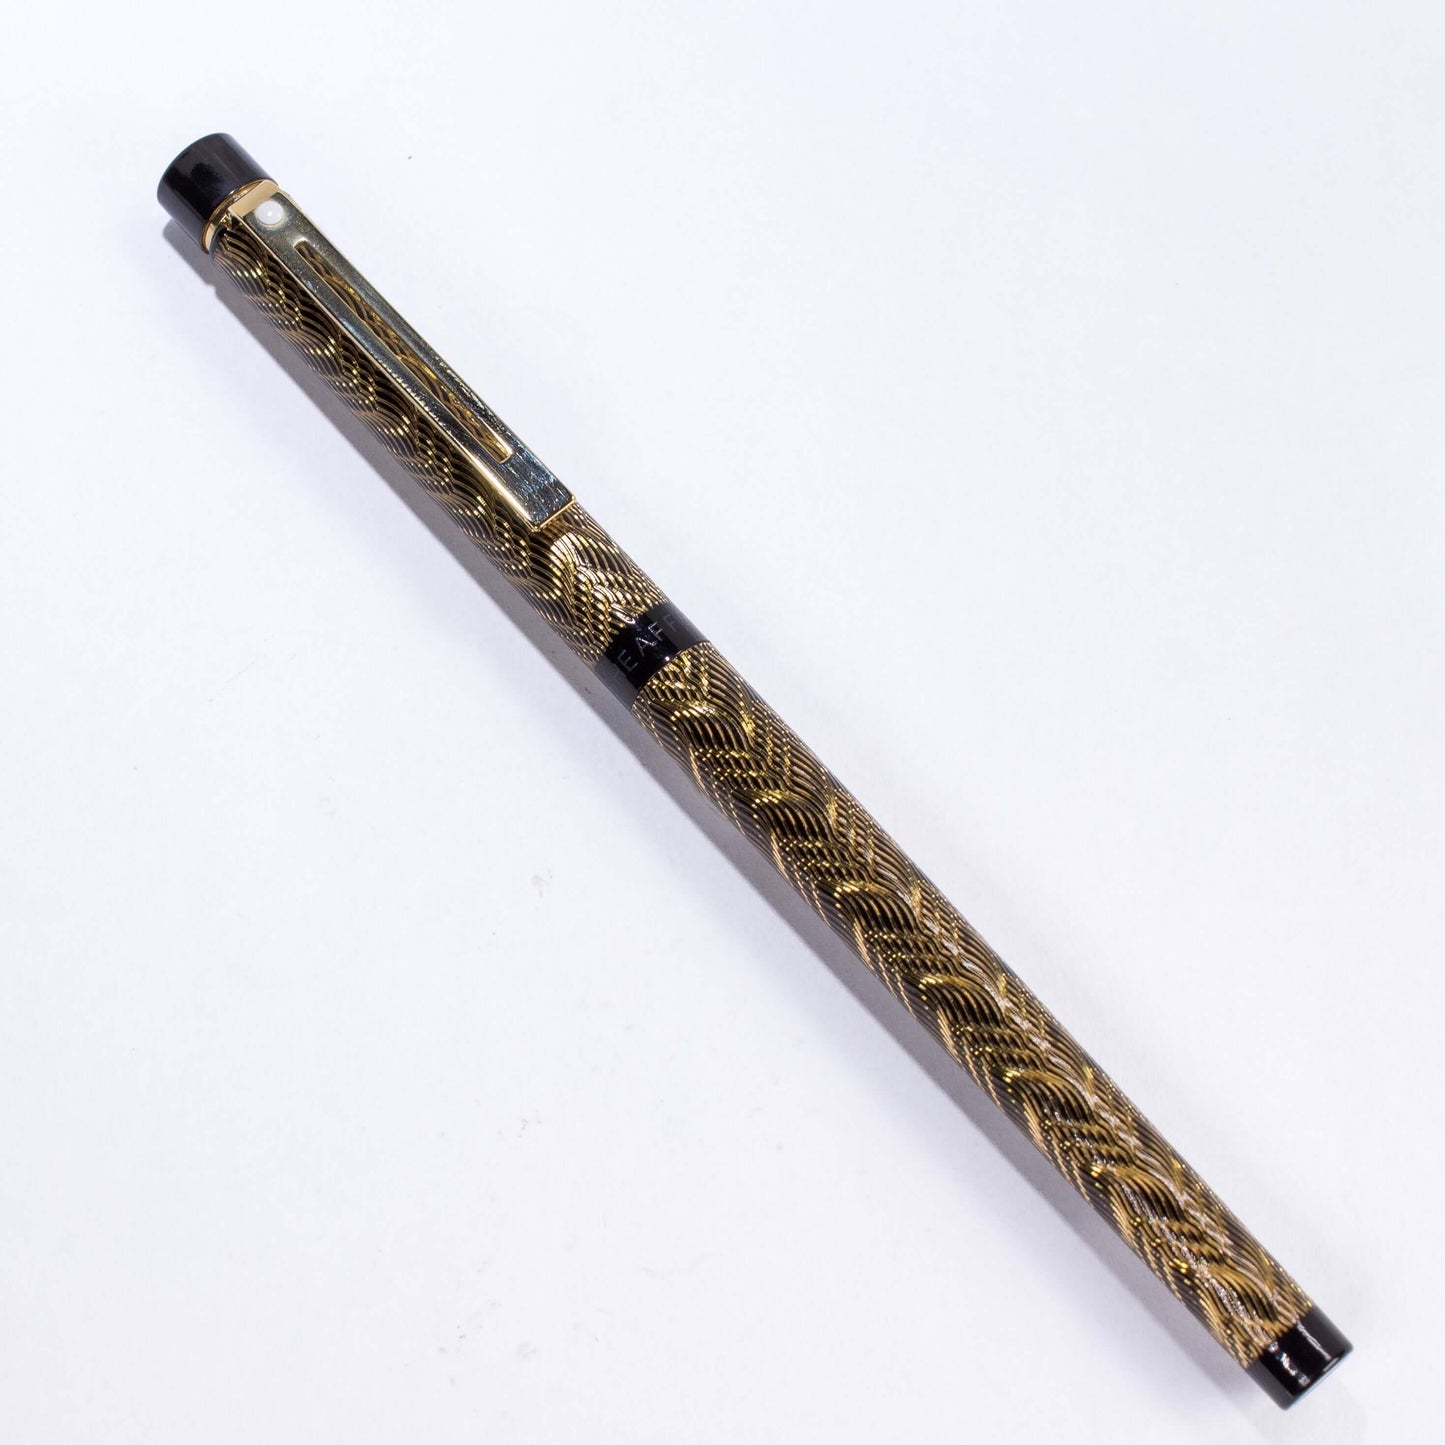 ${titleName/Type: Sheaffer Slim Targa Manufacture Year: 1980s Length: 5 3/8 Filling System: It takes Slim Sheaffer-style cartridges or converters. The original squeeze converter is included. Color/Pattern: Brass and lacquer finish in a feather pattern. Ni